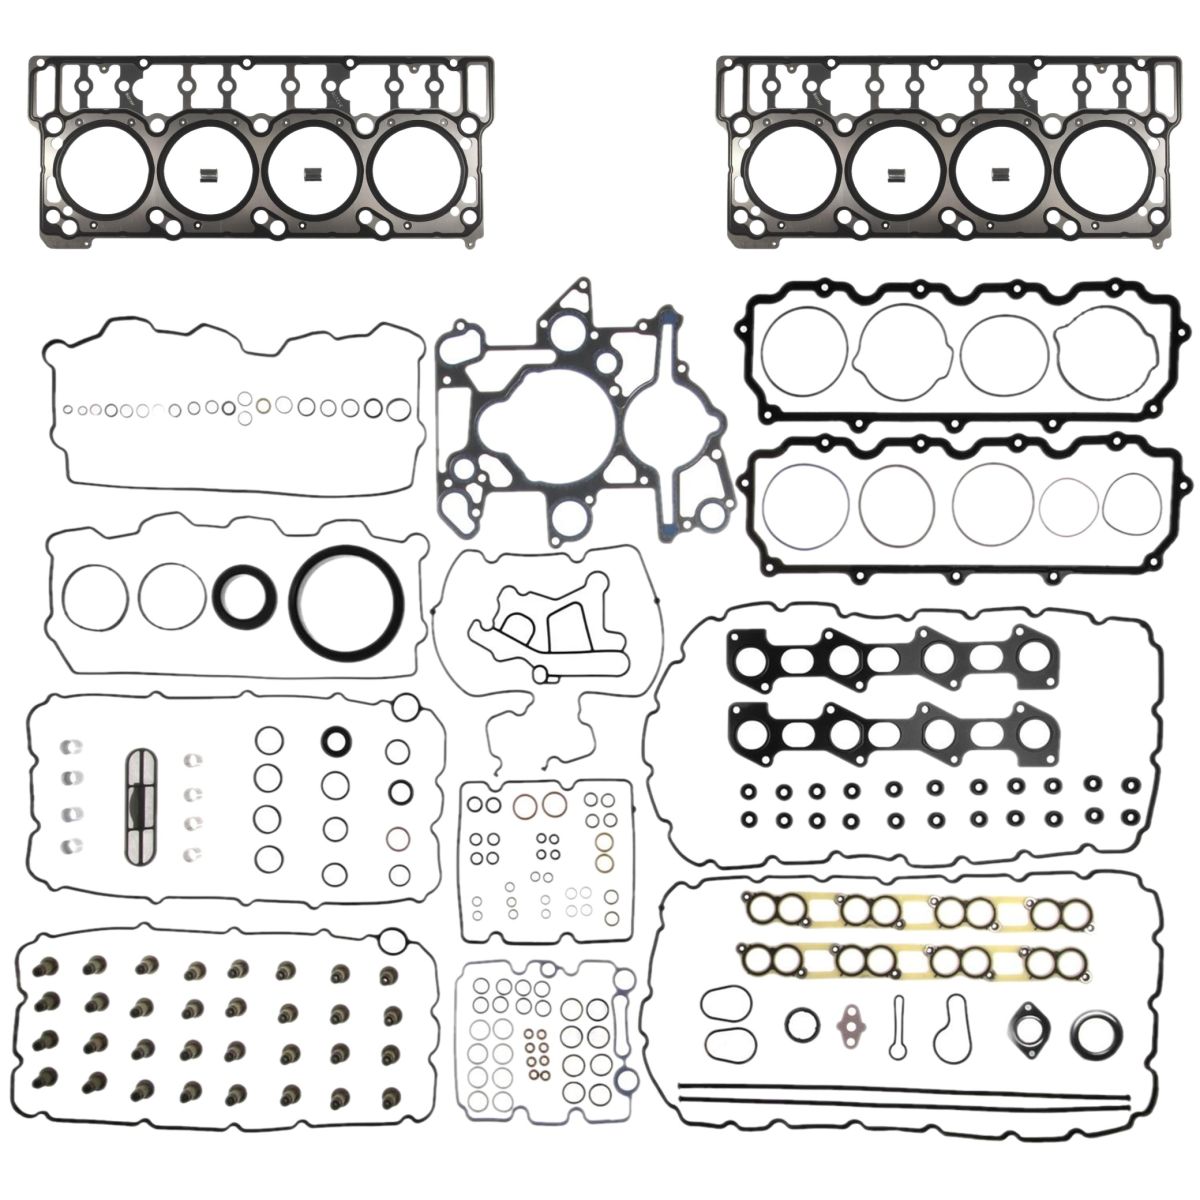 Mahle - Mahle 18MM Head Gasket Rebuild Kit For 03-06 Ford F-250/F-350 6.0L Powerstroke